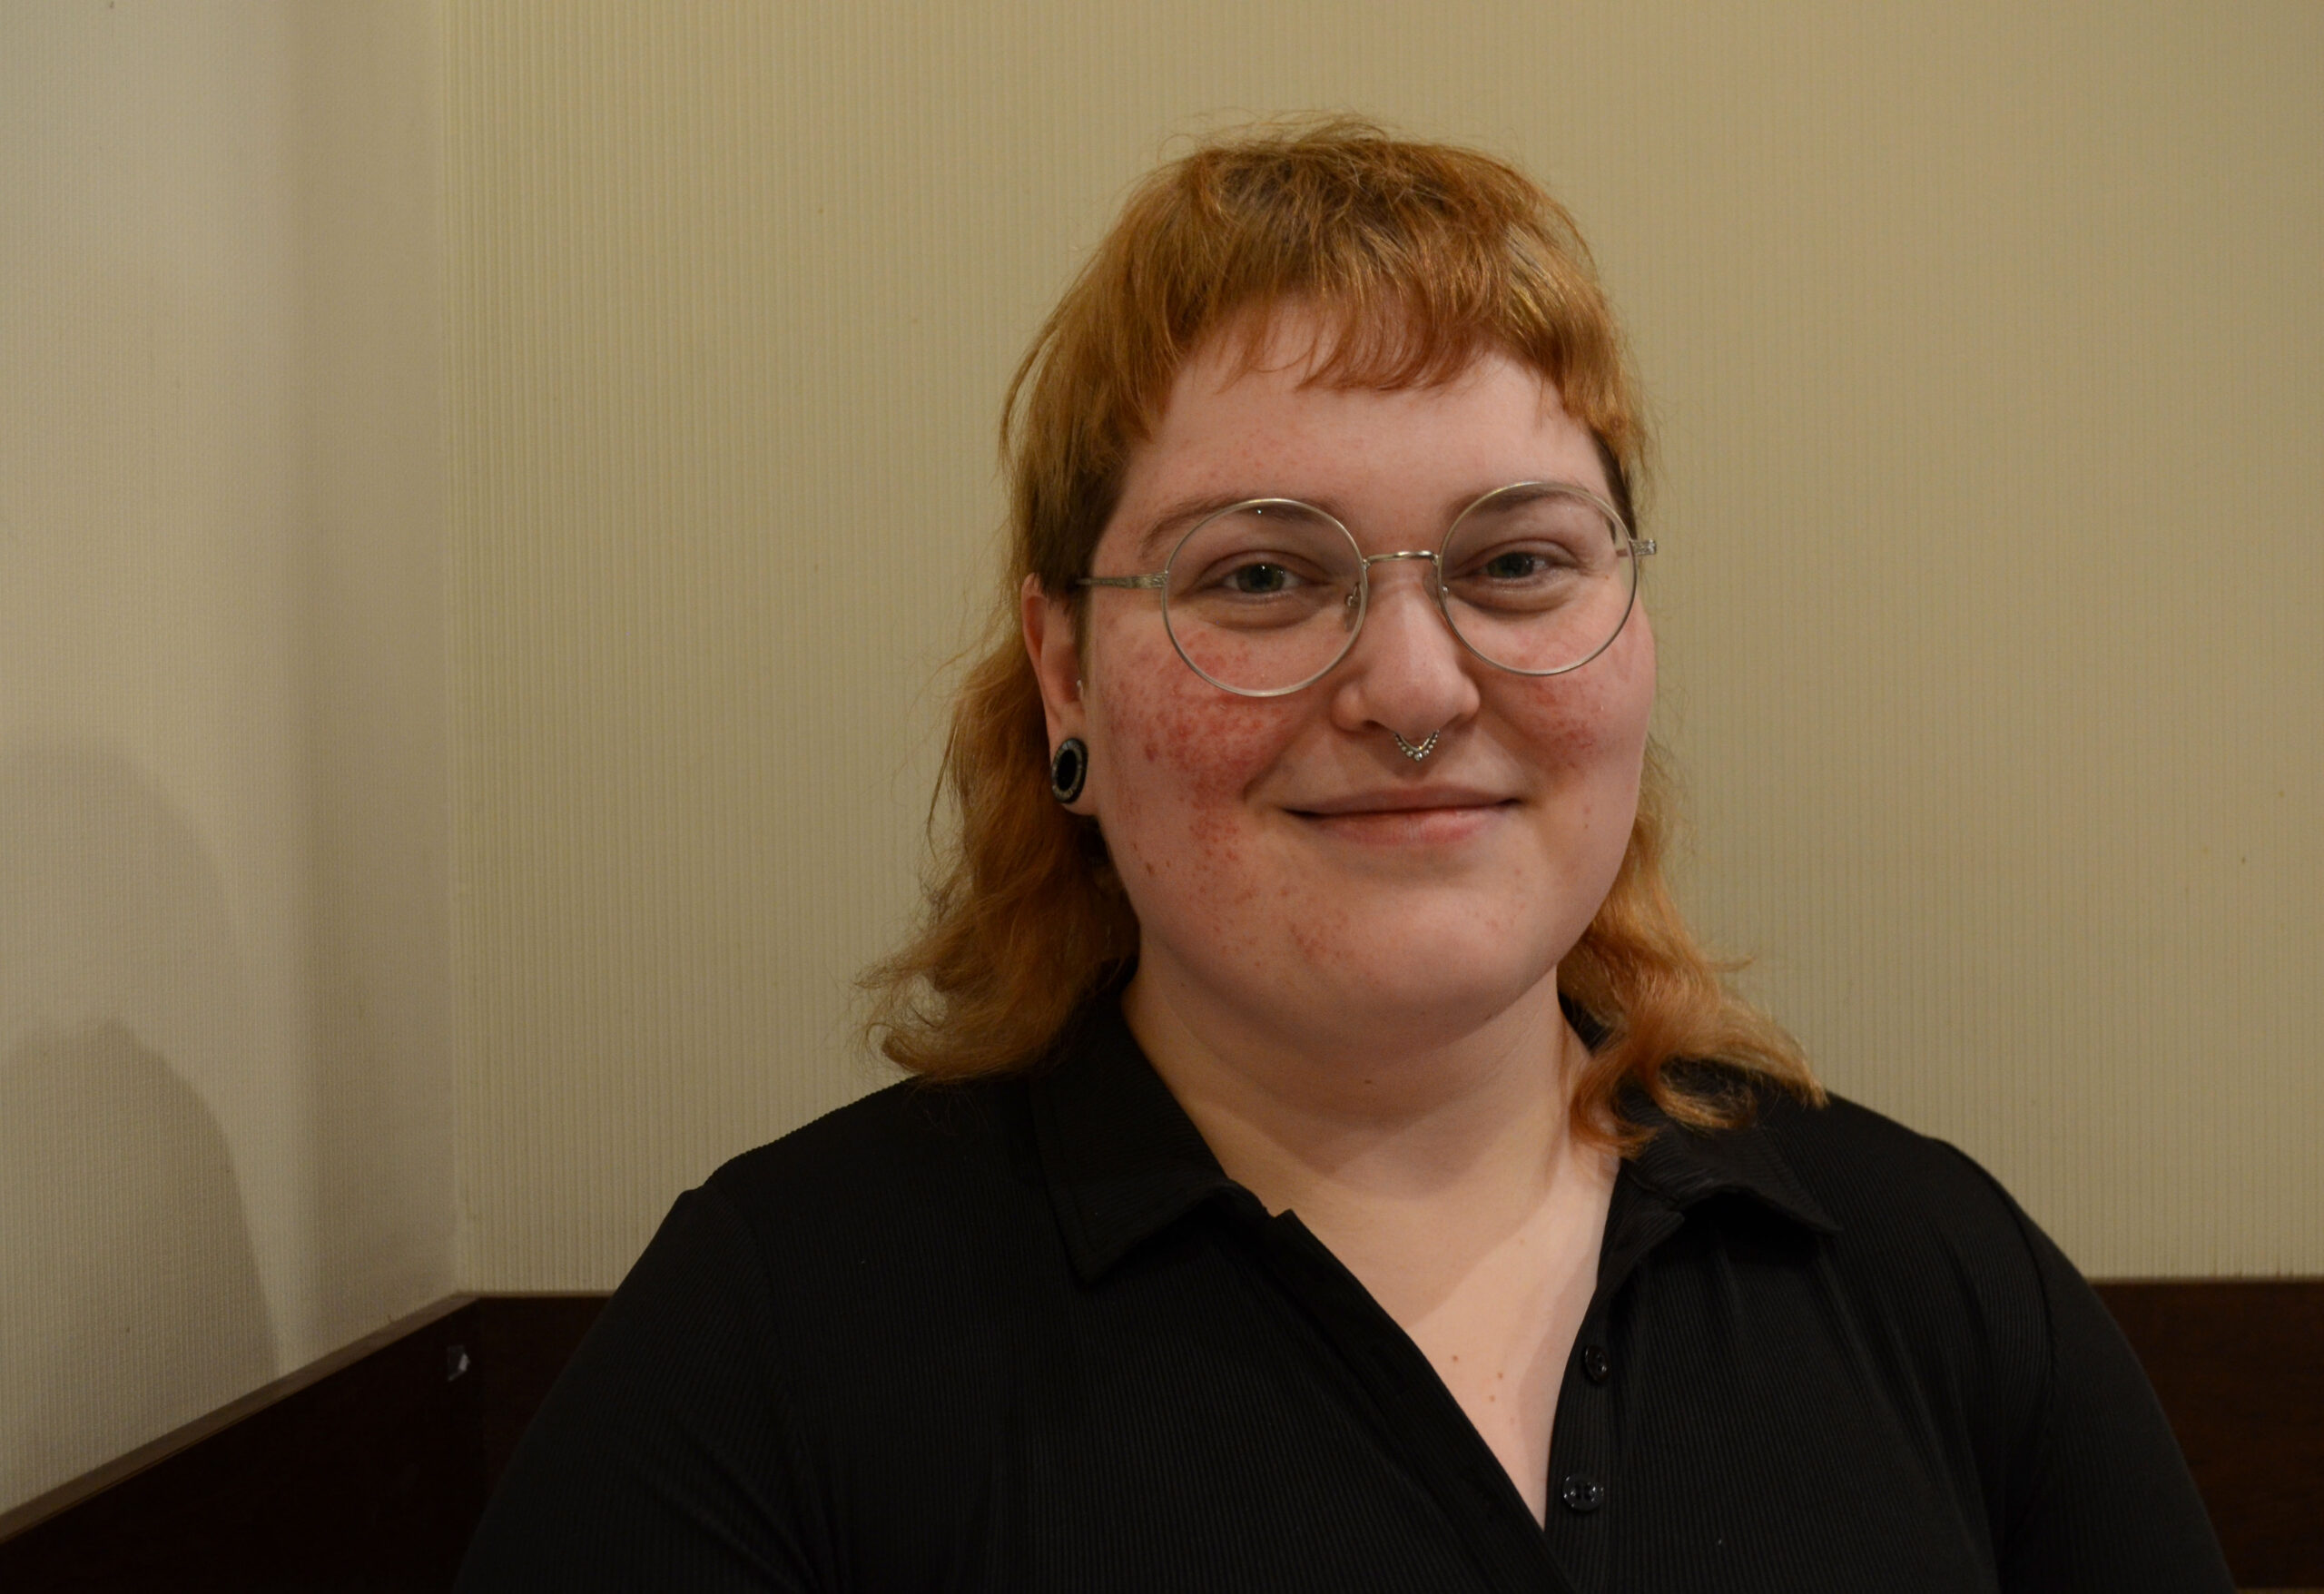 Stef Curran smiles at the camera in front of a beige wall with dark wood border at the bottom. She has a strawberry blonde mullet and round glasses. Her skin is pale with freckles. She is wearing a plain black shirt with a slight v-neck.